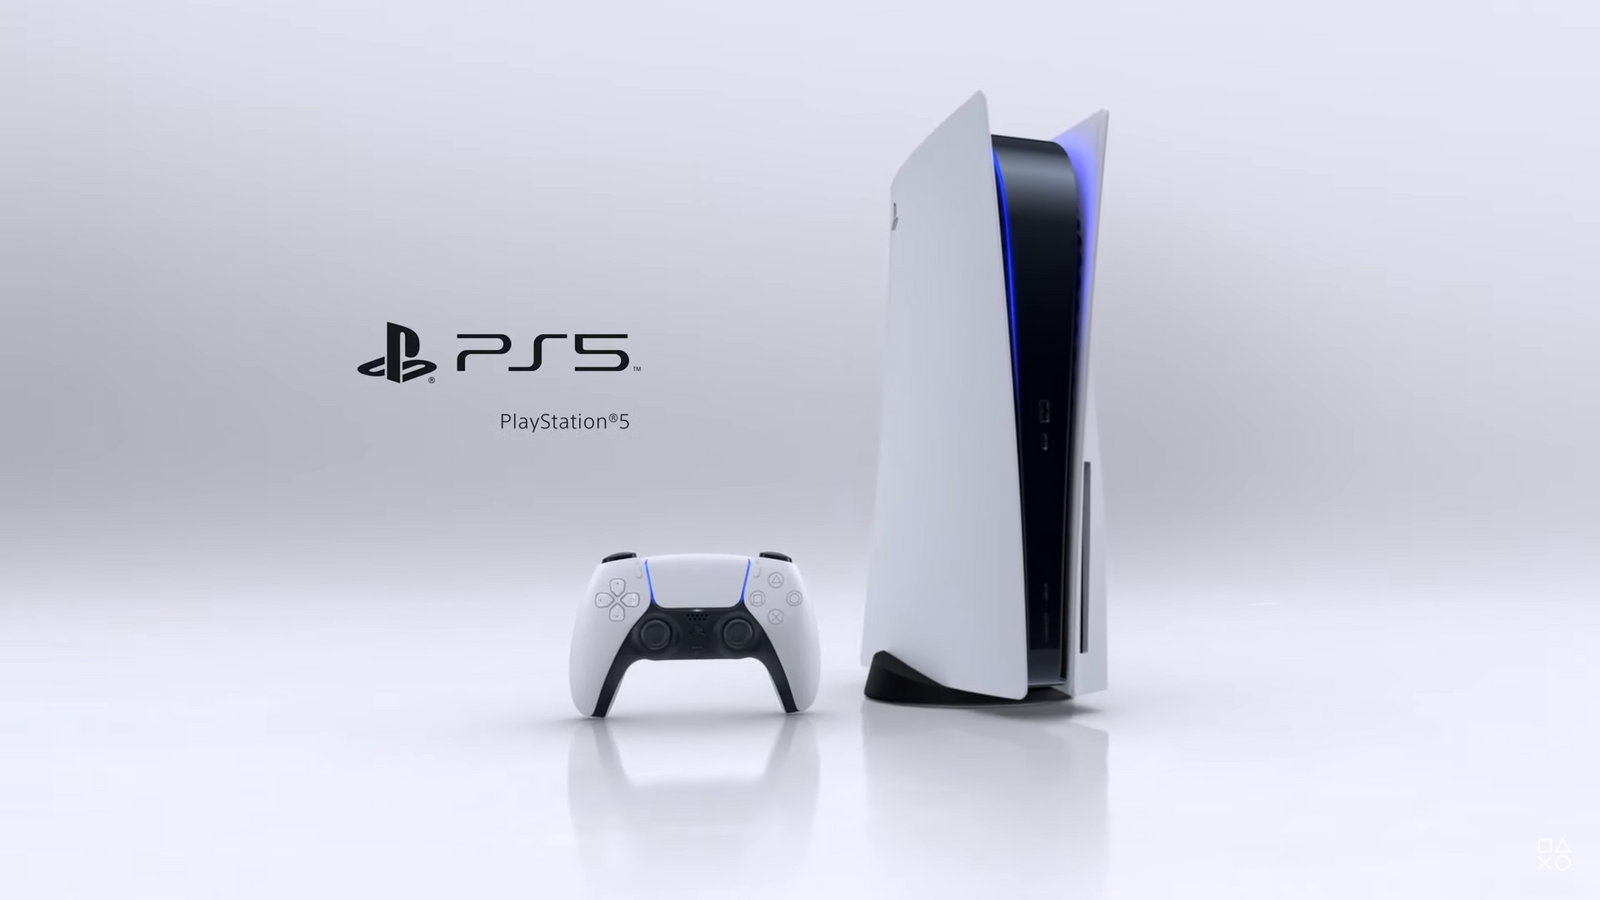 An image of a PlayStation 5 console with a plain-white background